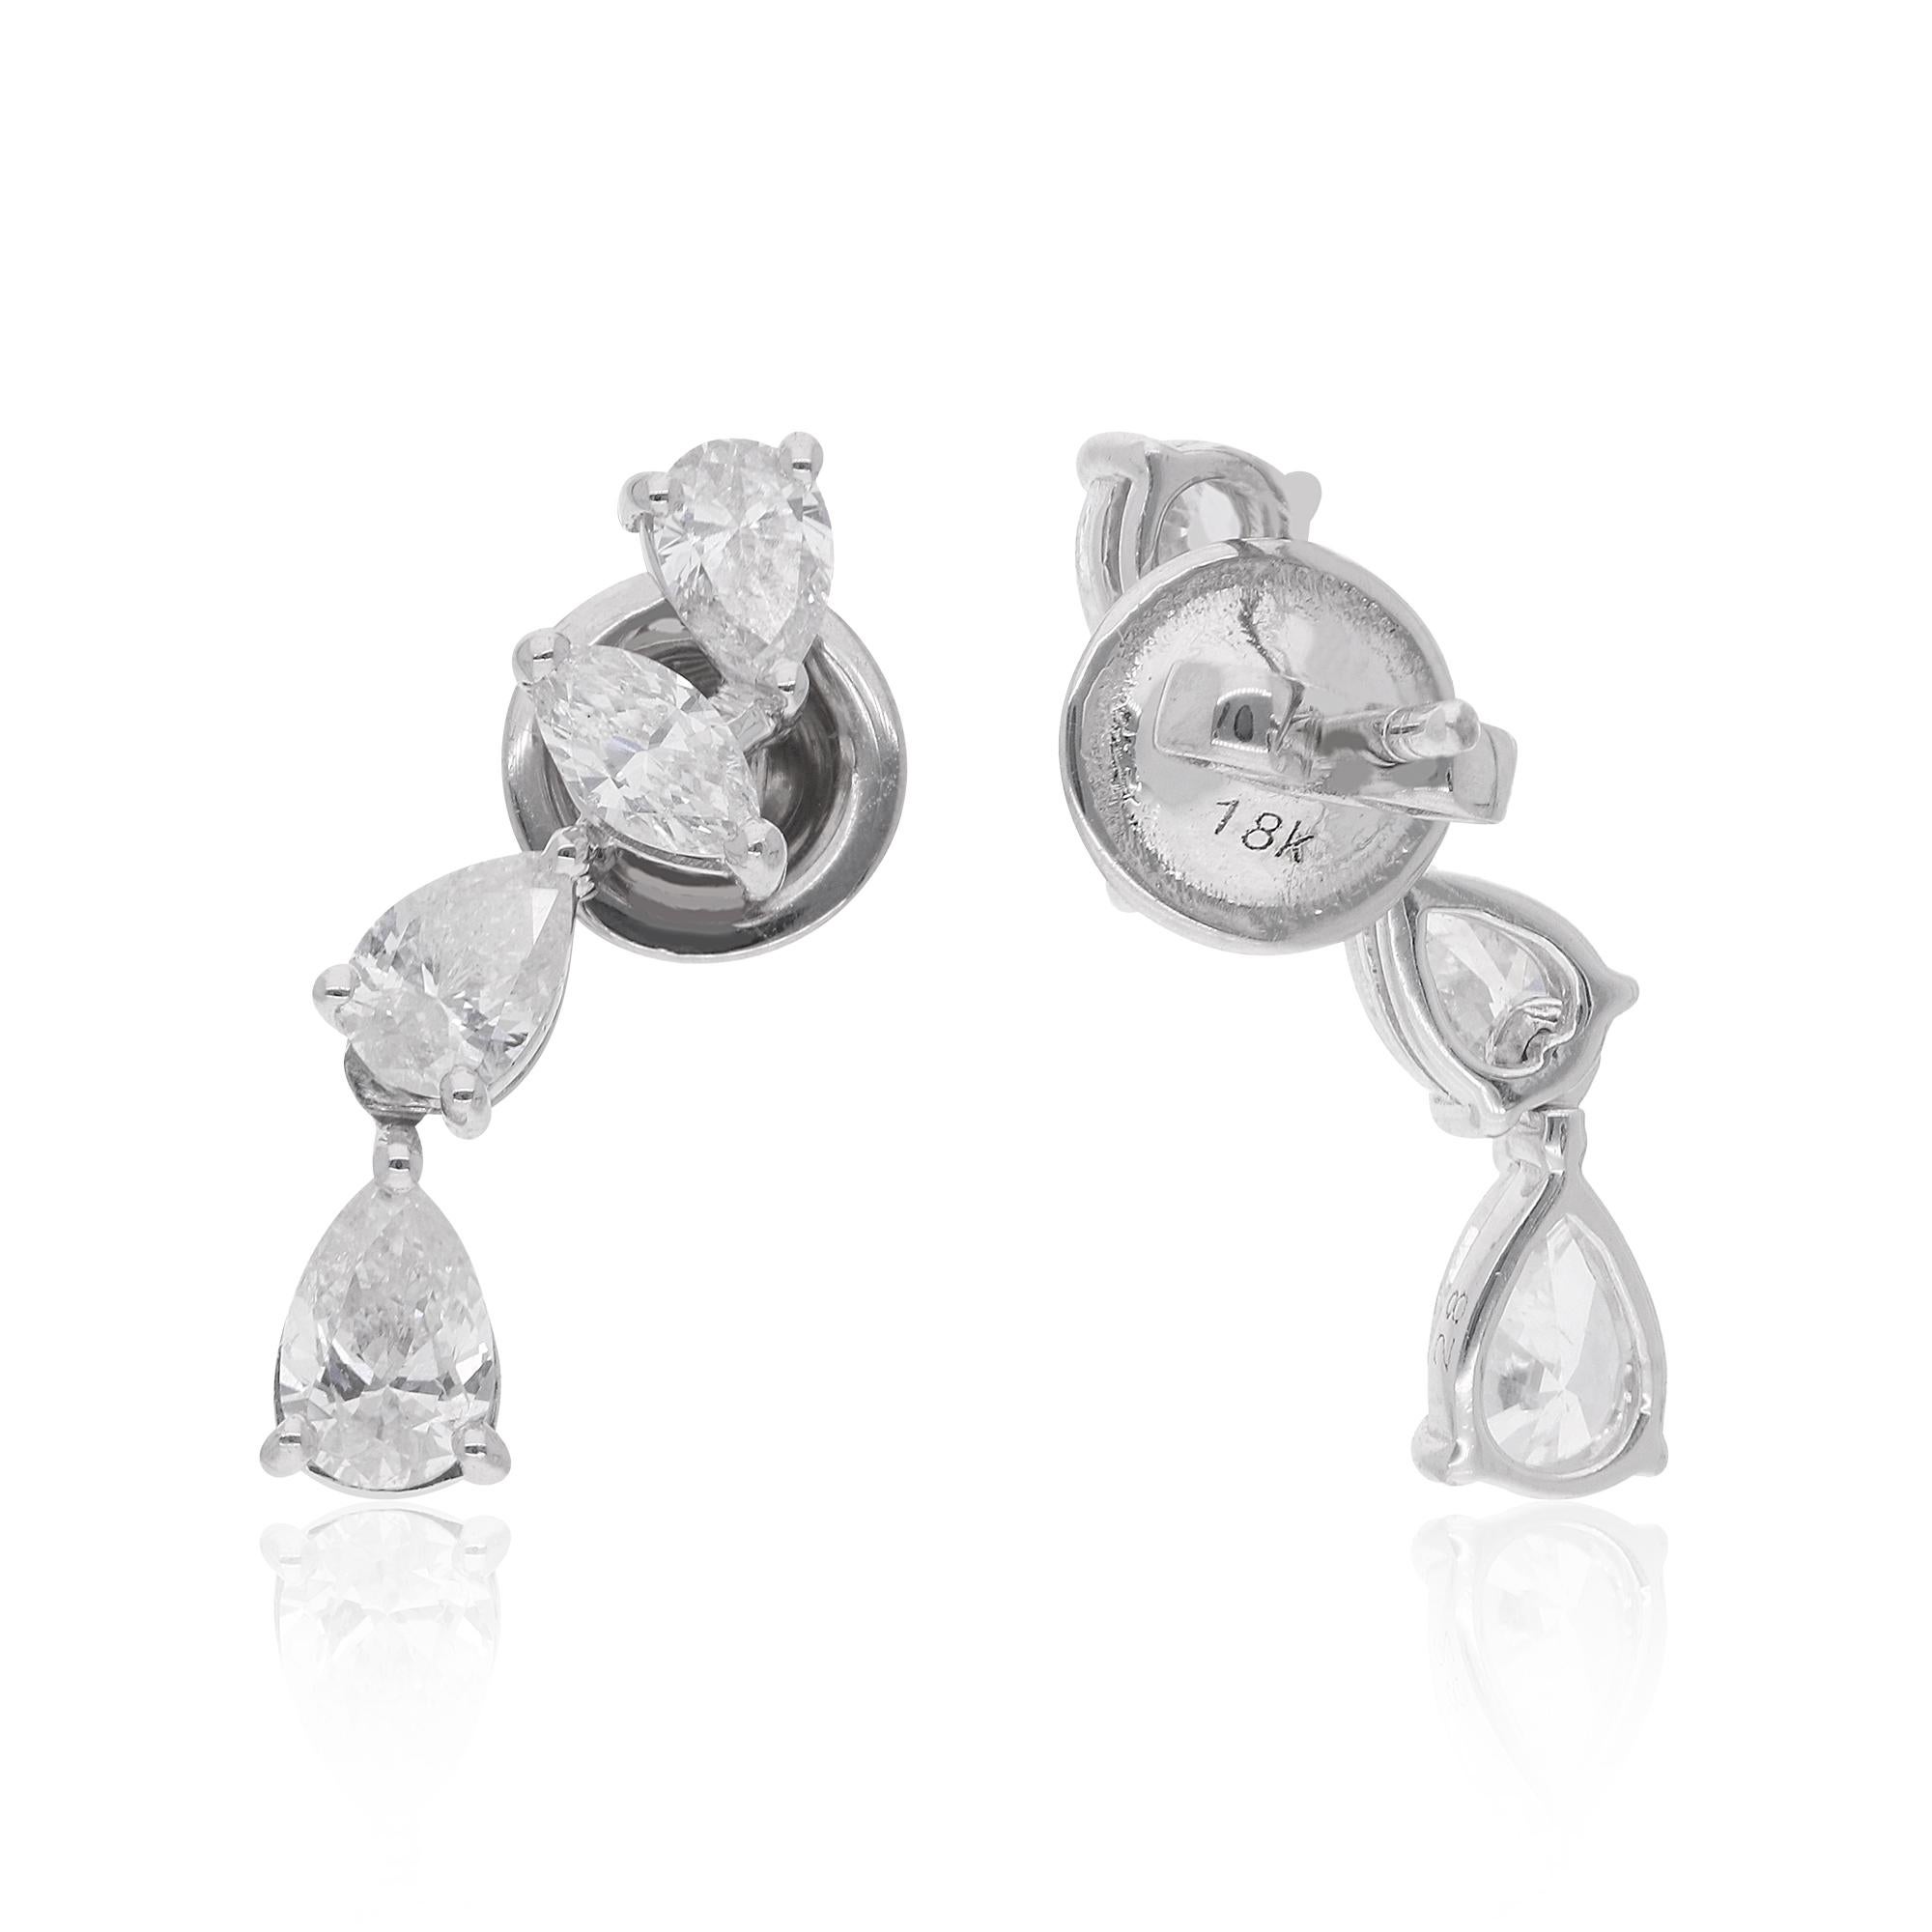 Indulge in the timeless elegance and exquisite craftsmanship of these stunning 1.86 Carat Marquise & Pear Diamond Earrings, meticulously crafted in luxurious 18 Karat White Gold. Handmade with meticulous attention to detail, these earrings exude